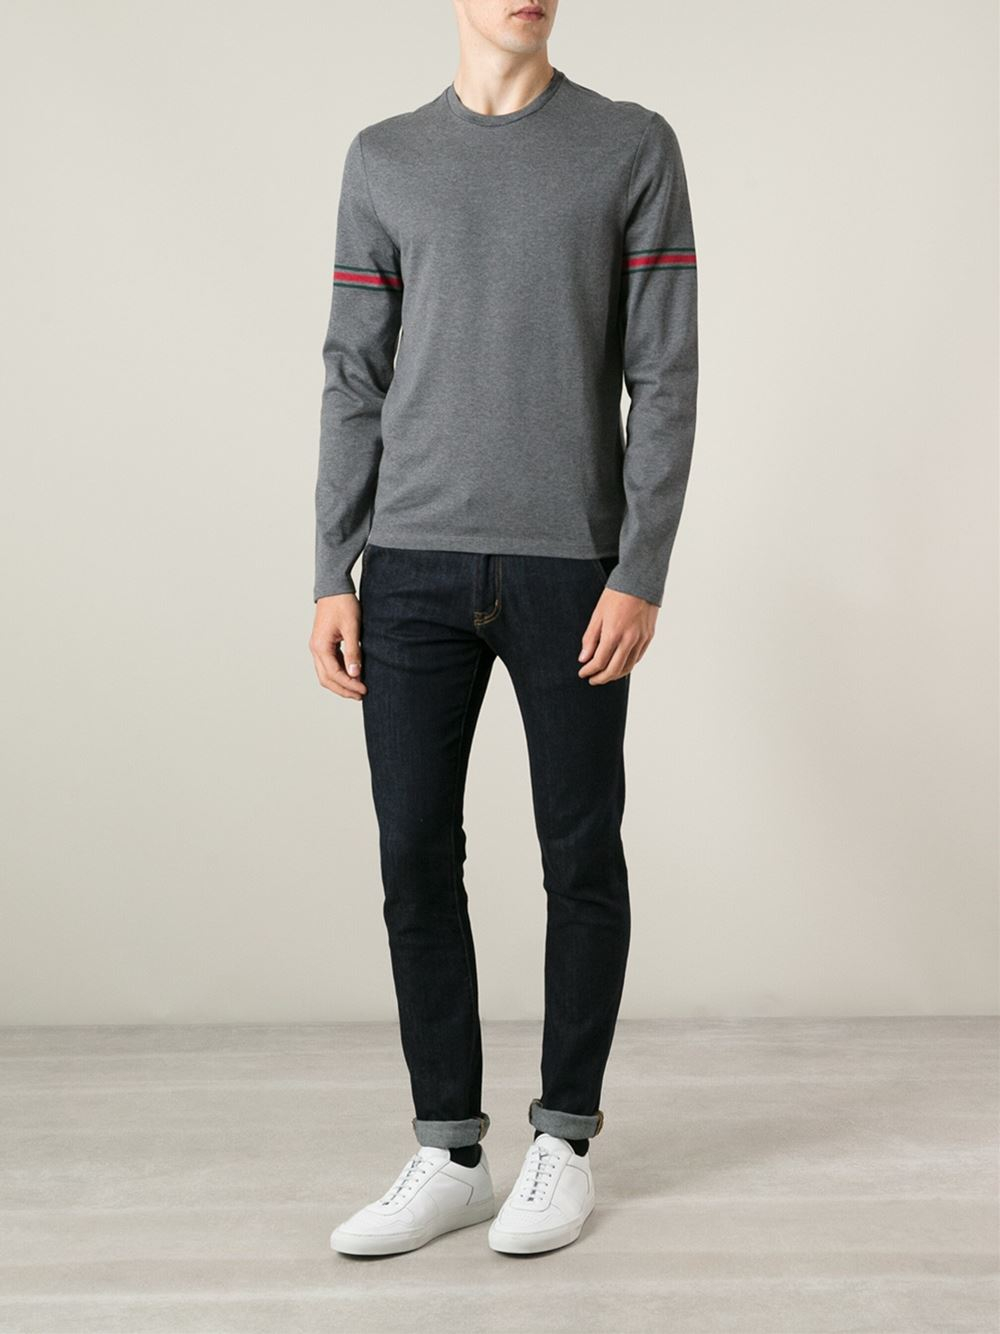 Gucci Long Sleeve T-Shirt in Grey (Gray) for Men - Lyst